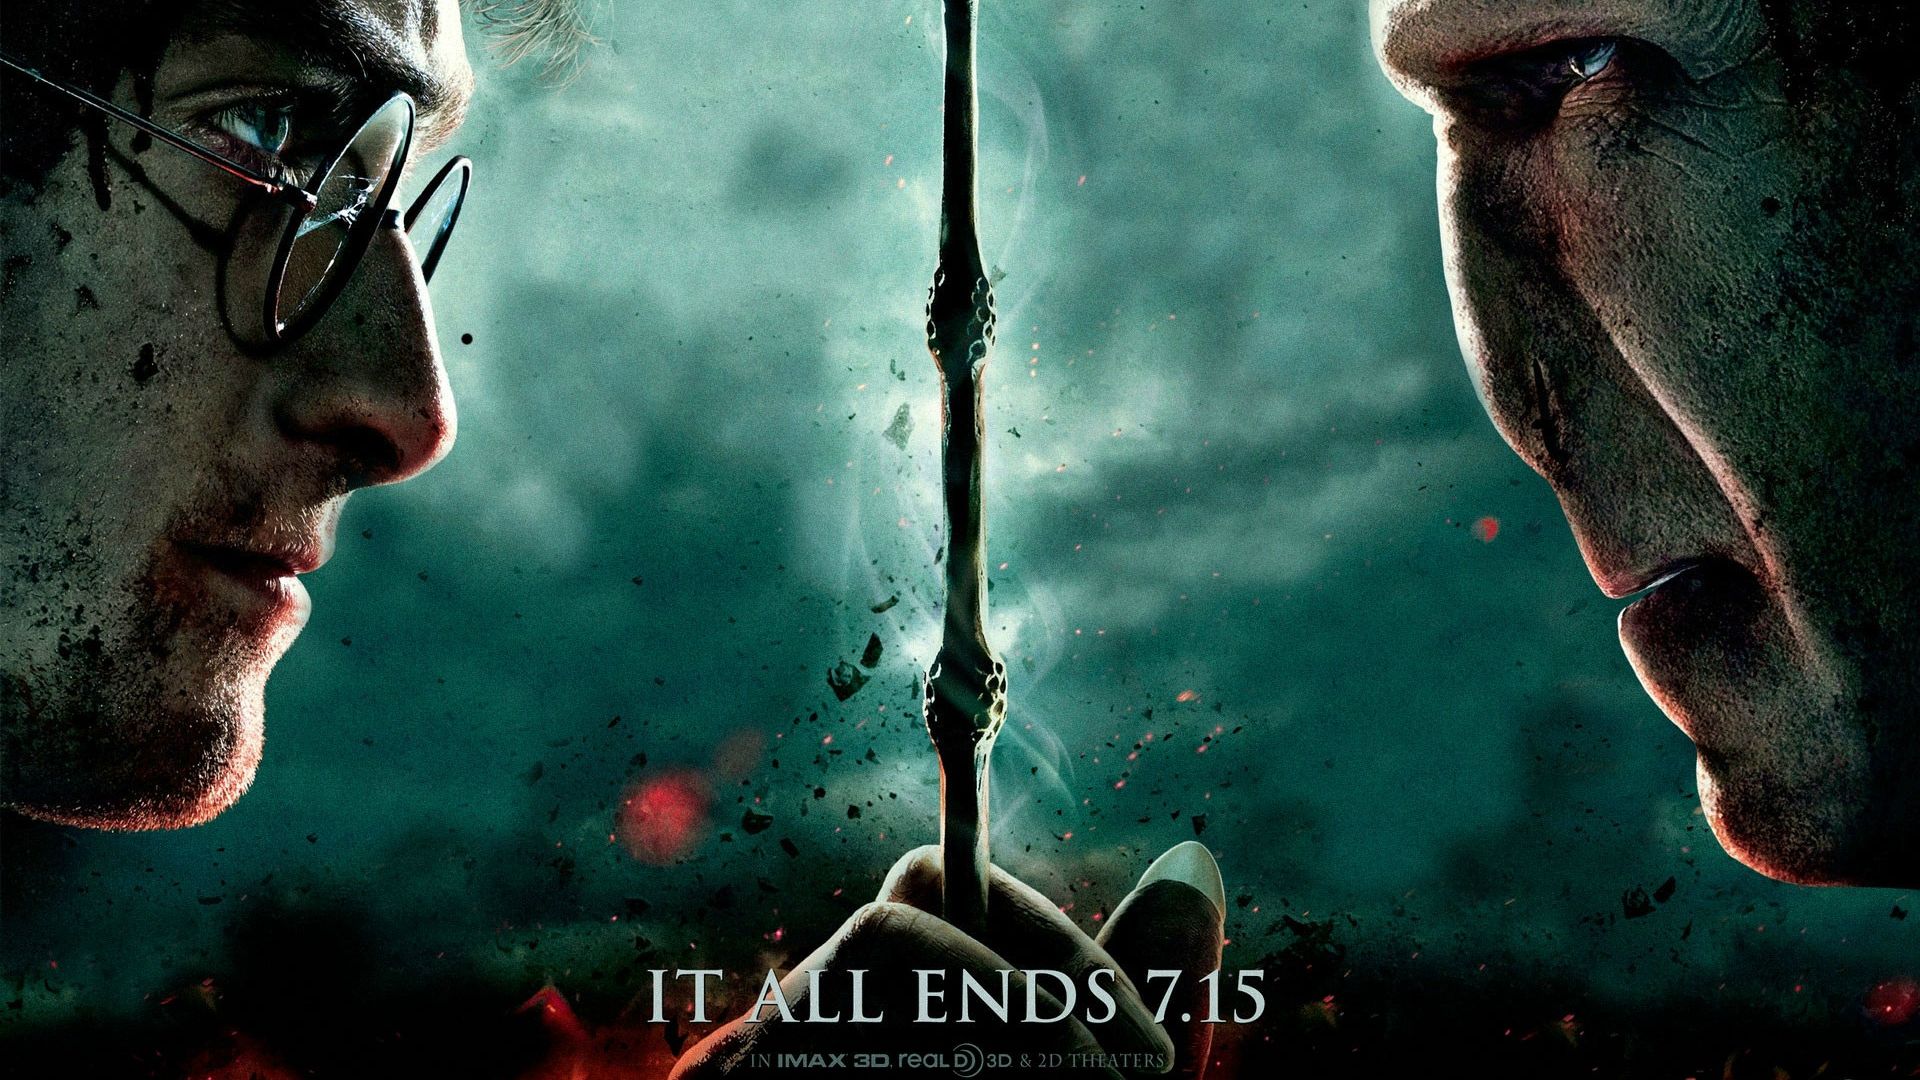 Cool Wallpapers harry potter, movie, harry potter and the deathly hallows: part 2